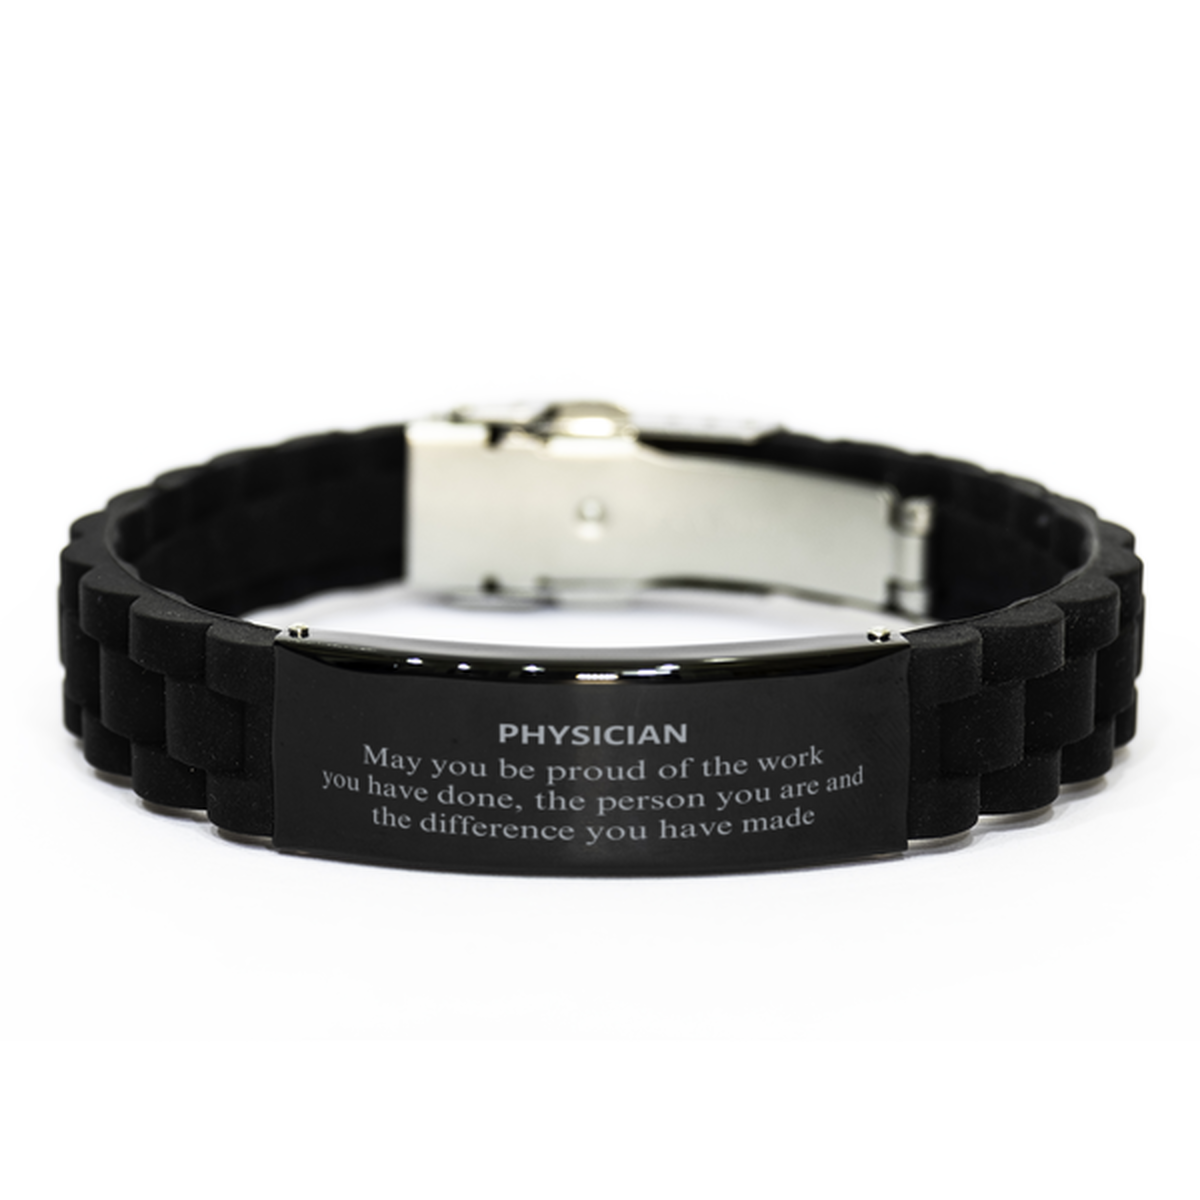 Physician May you be proud of the work you have done, Retirement Physician Black Glidelock Clasp Bracelet for Colleague Appreciation Gifts Amazing for Physician